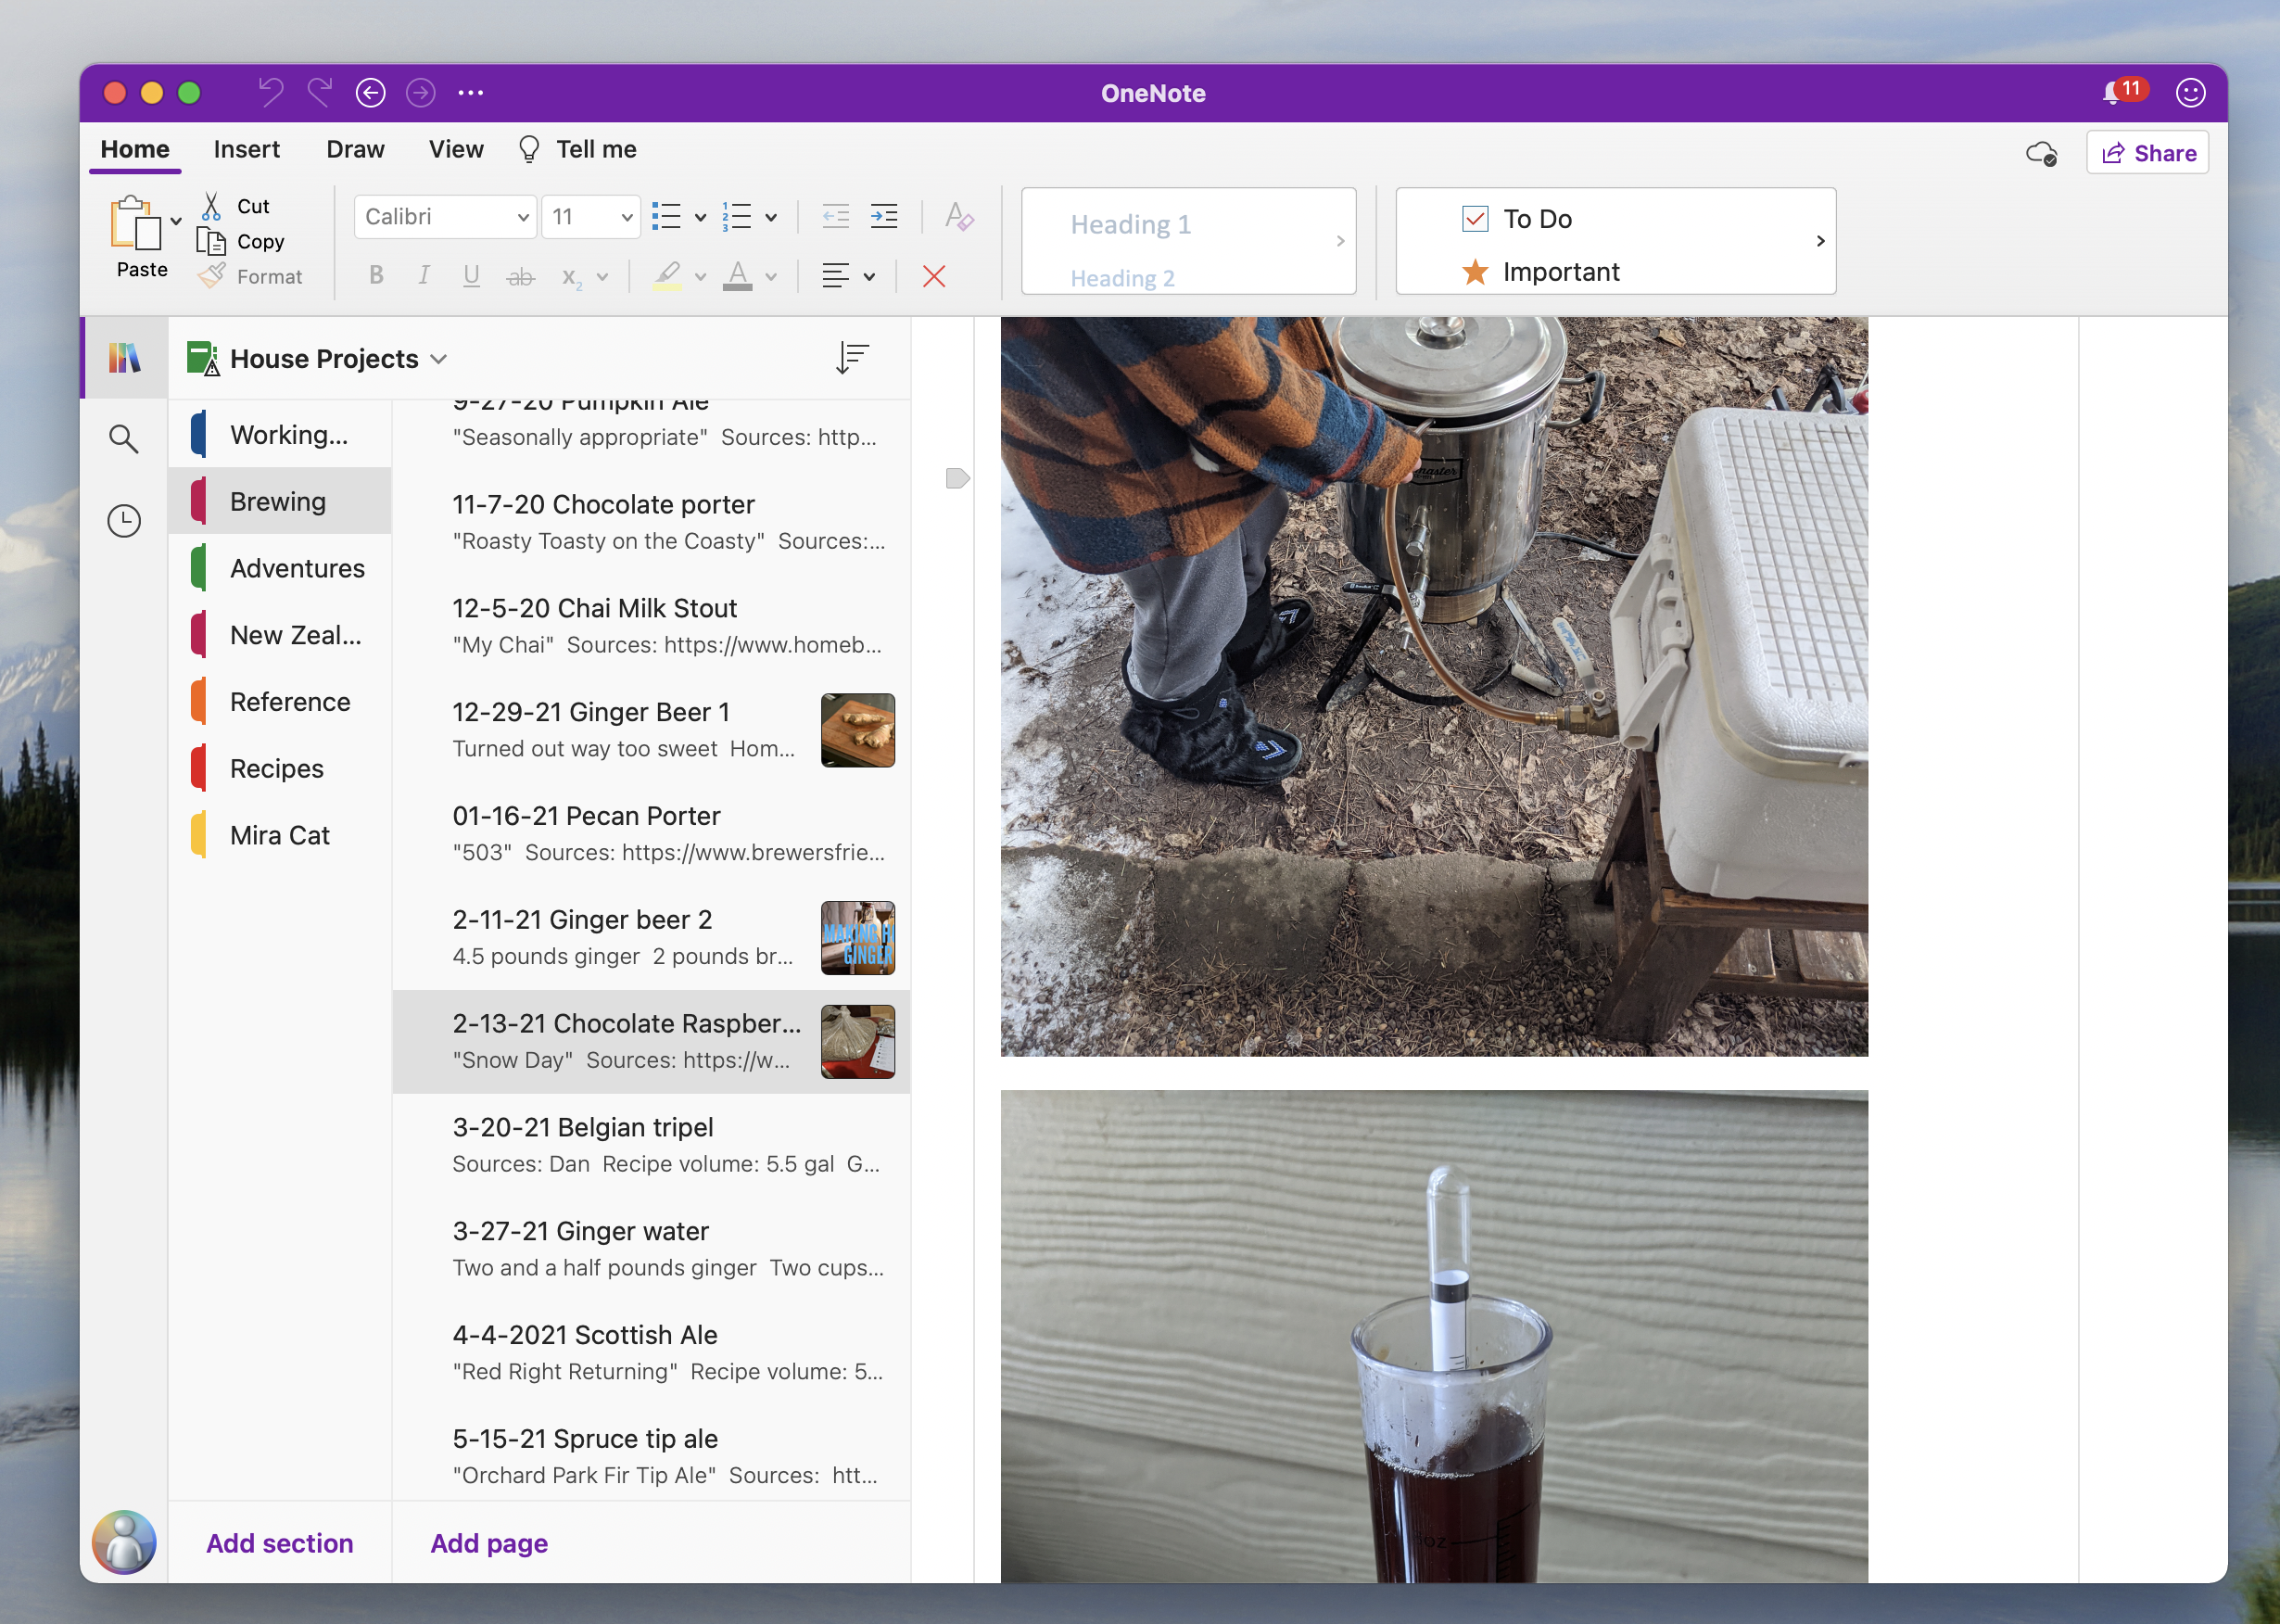 onenote for mac sync doesn